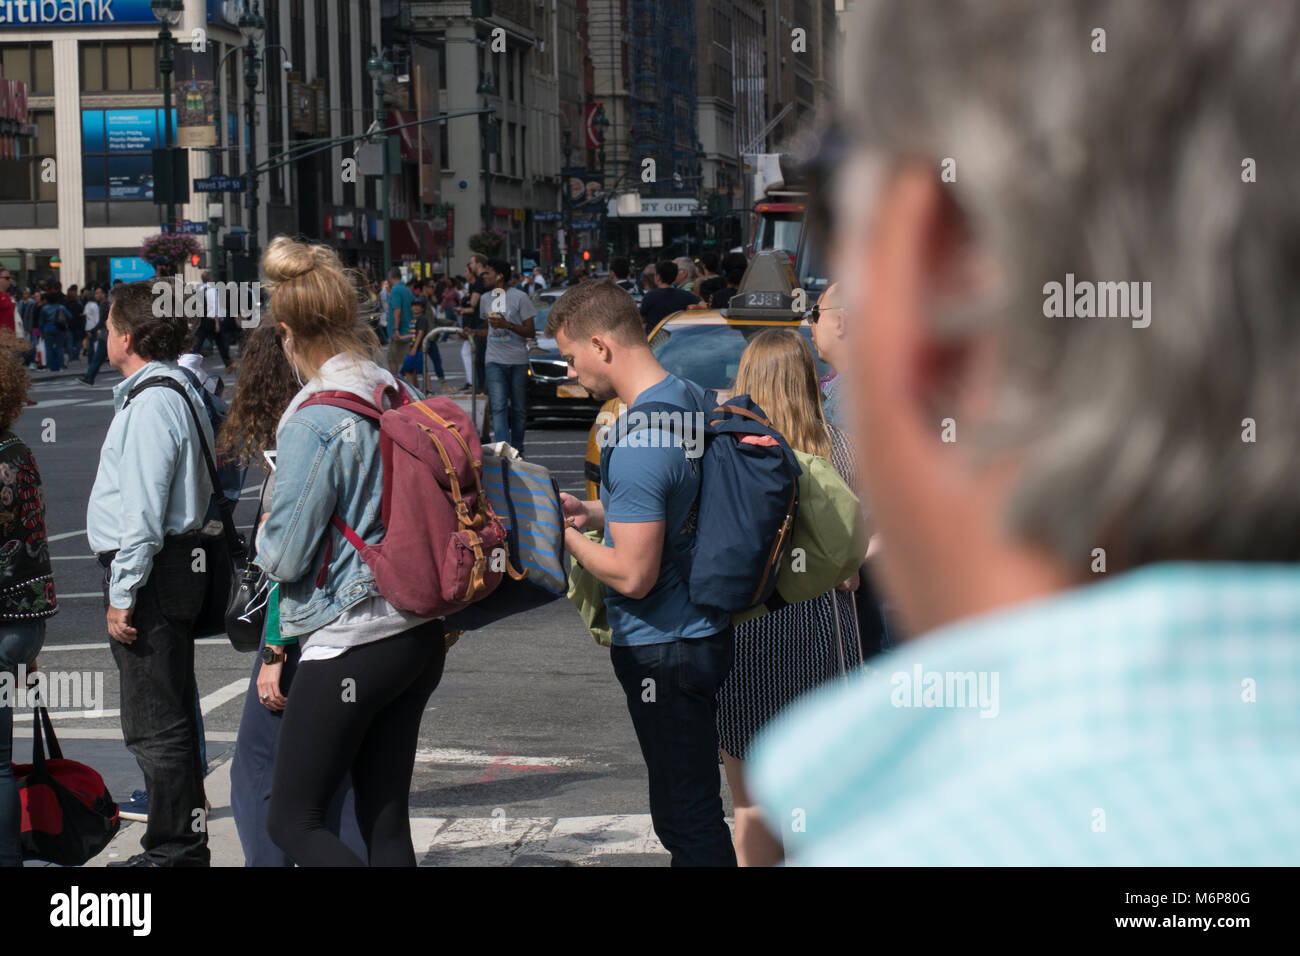 New York City, Circa 2017: Busy manhattan crosswalk intersection over the shoulder of man waiting to safely cross street during day time Stock Photo